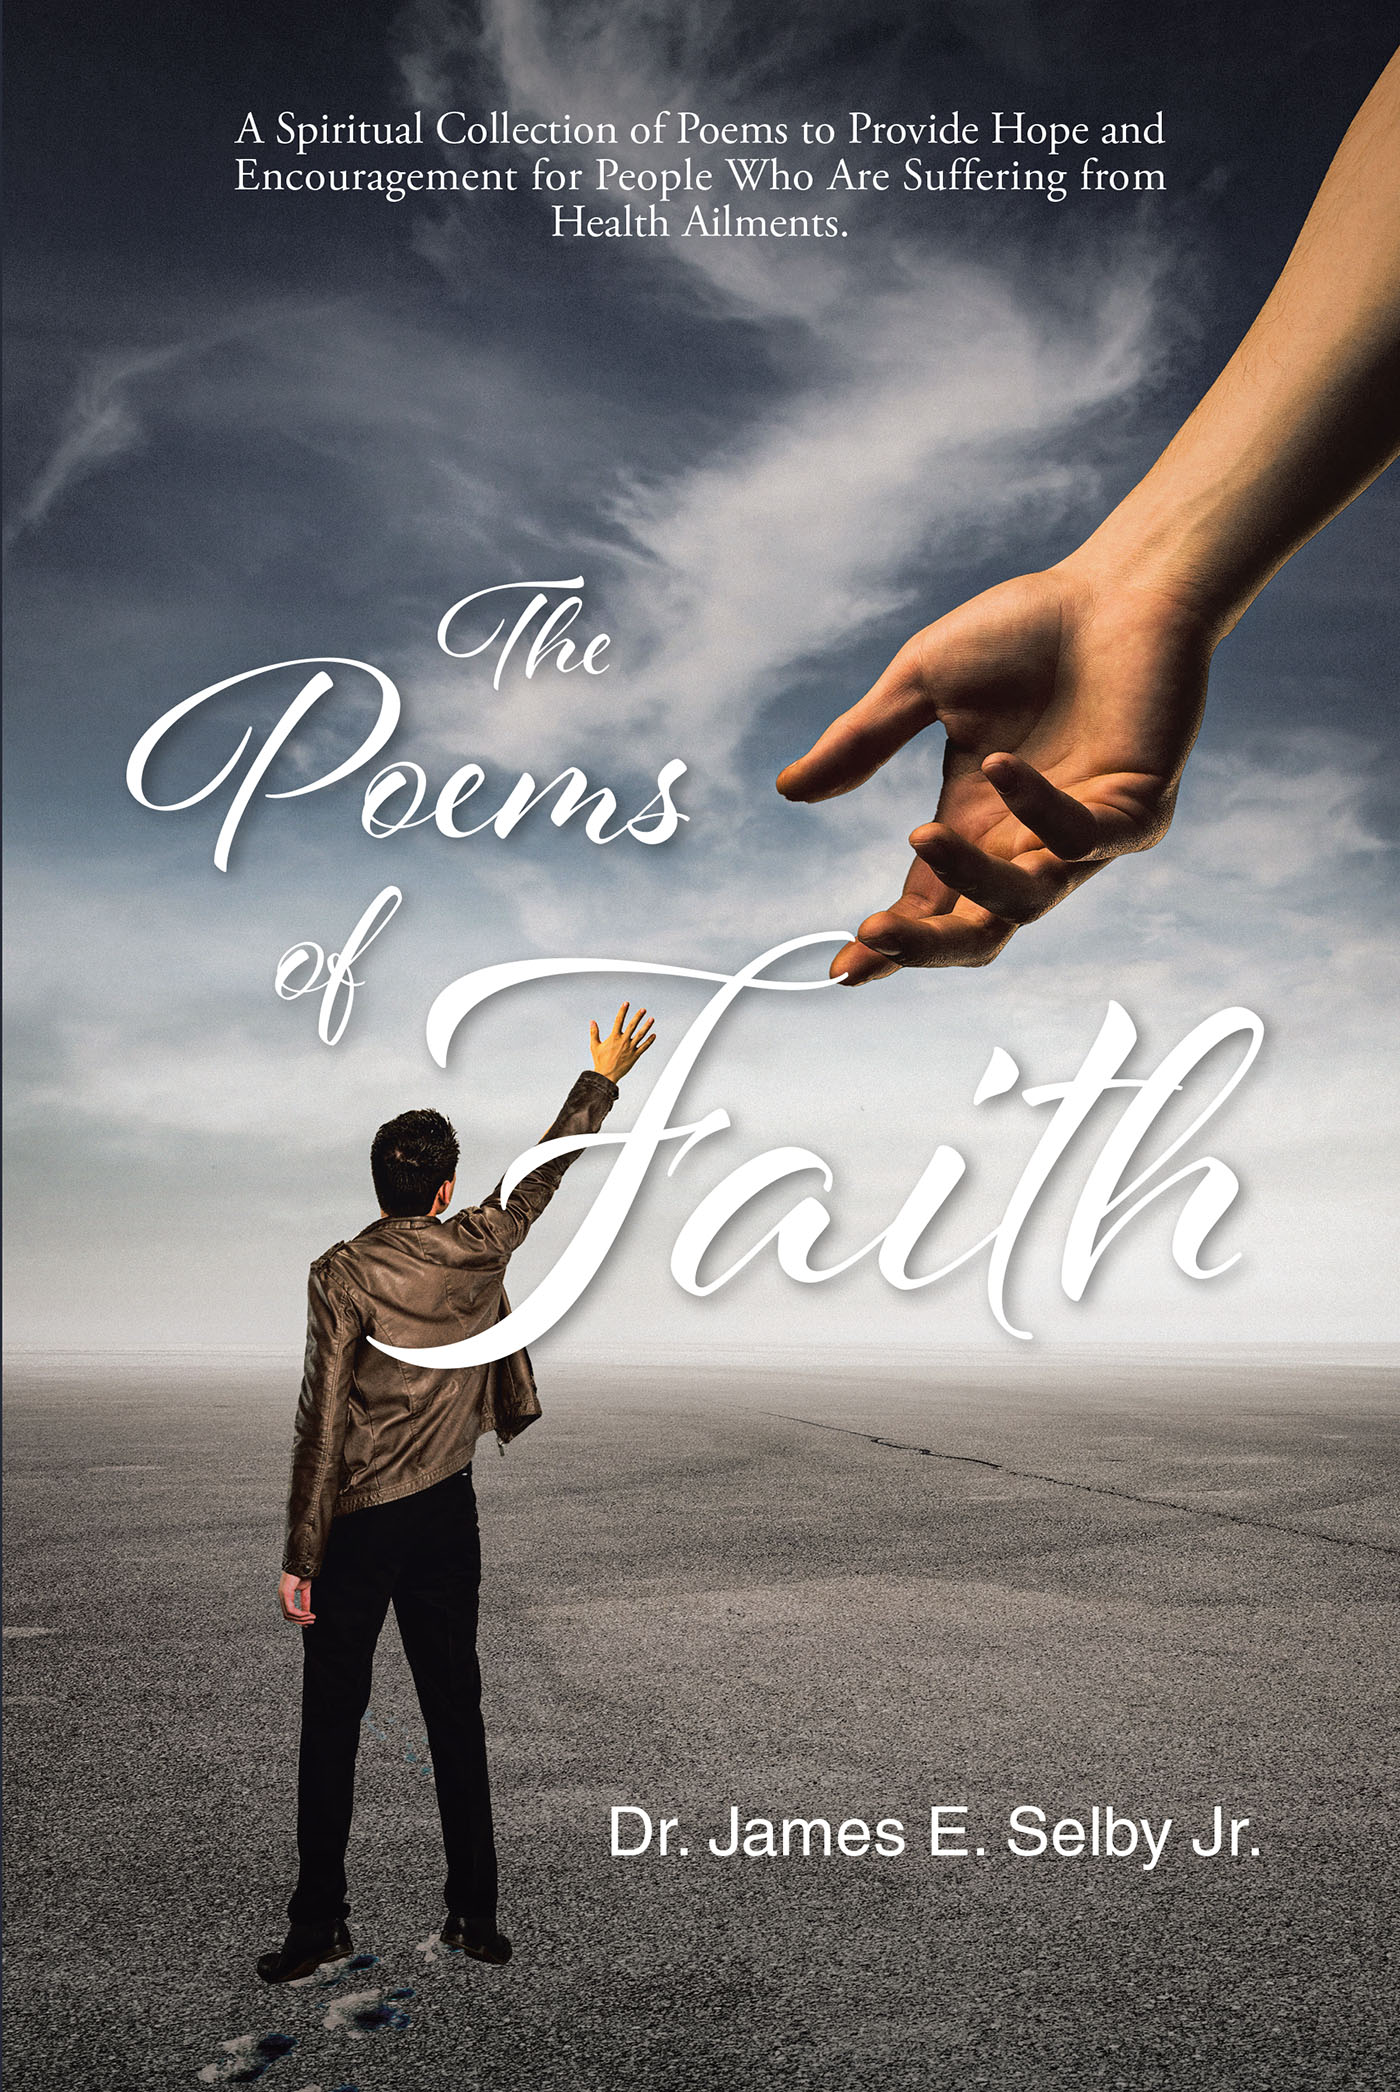 Dr. James E. Selby Jr.’s Newly Released "The Poems of Faith" is a Compassionate Resource for Encouragement for Those Facing Health Challenges